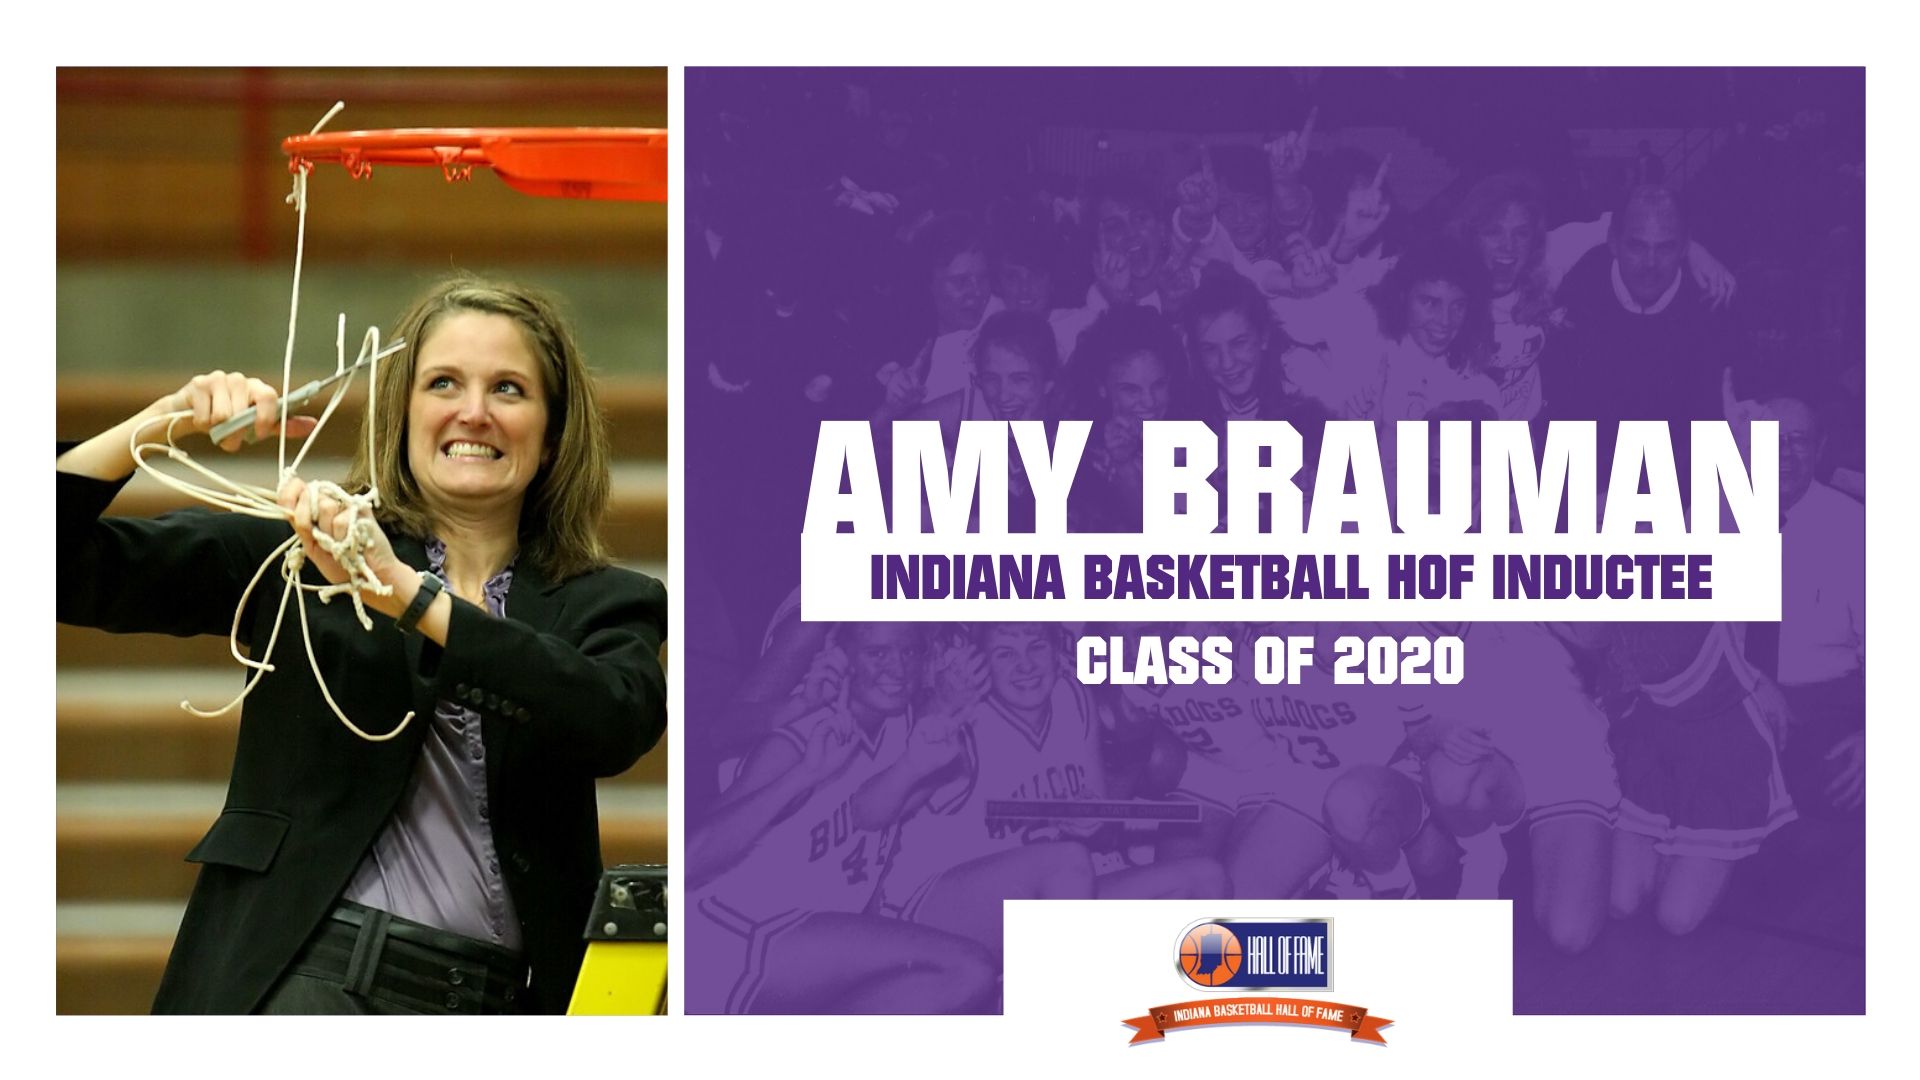 @bhsdogsghoops alum Brauman selected for 2020 Indiana Basketball Hall of Fame Women's Class